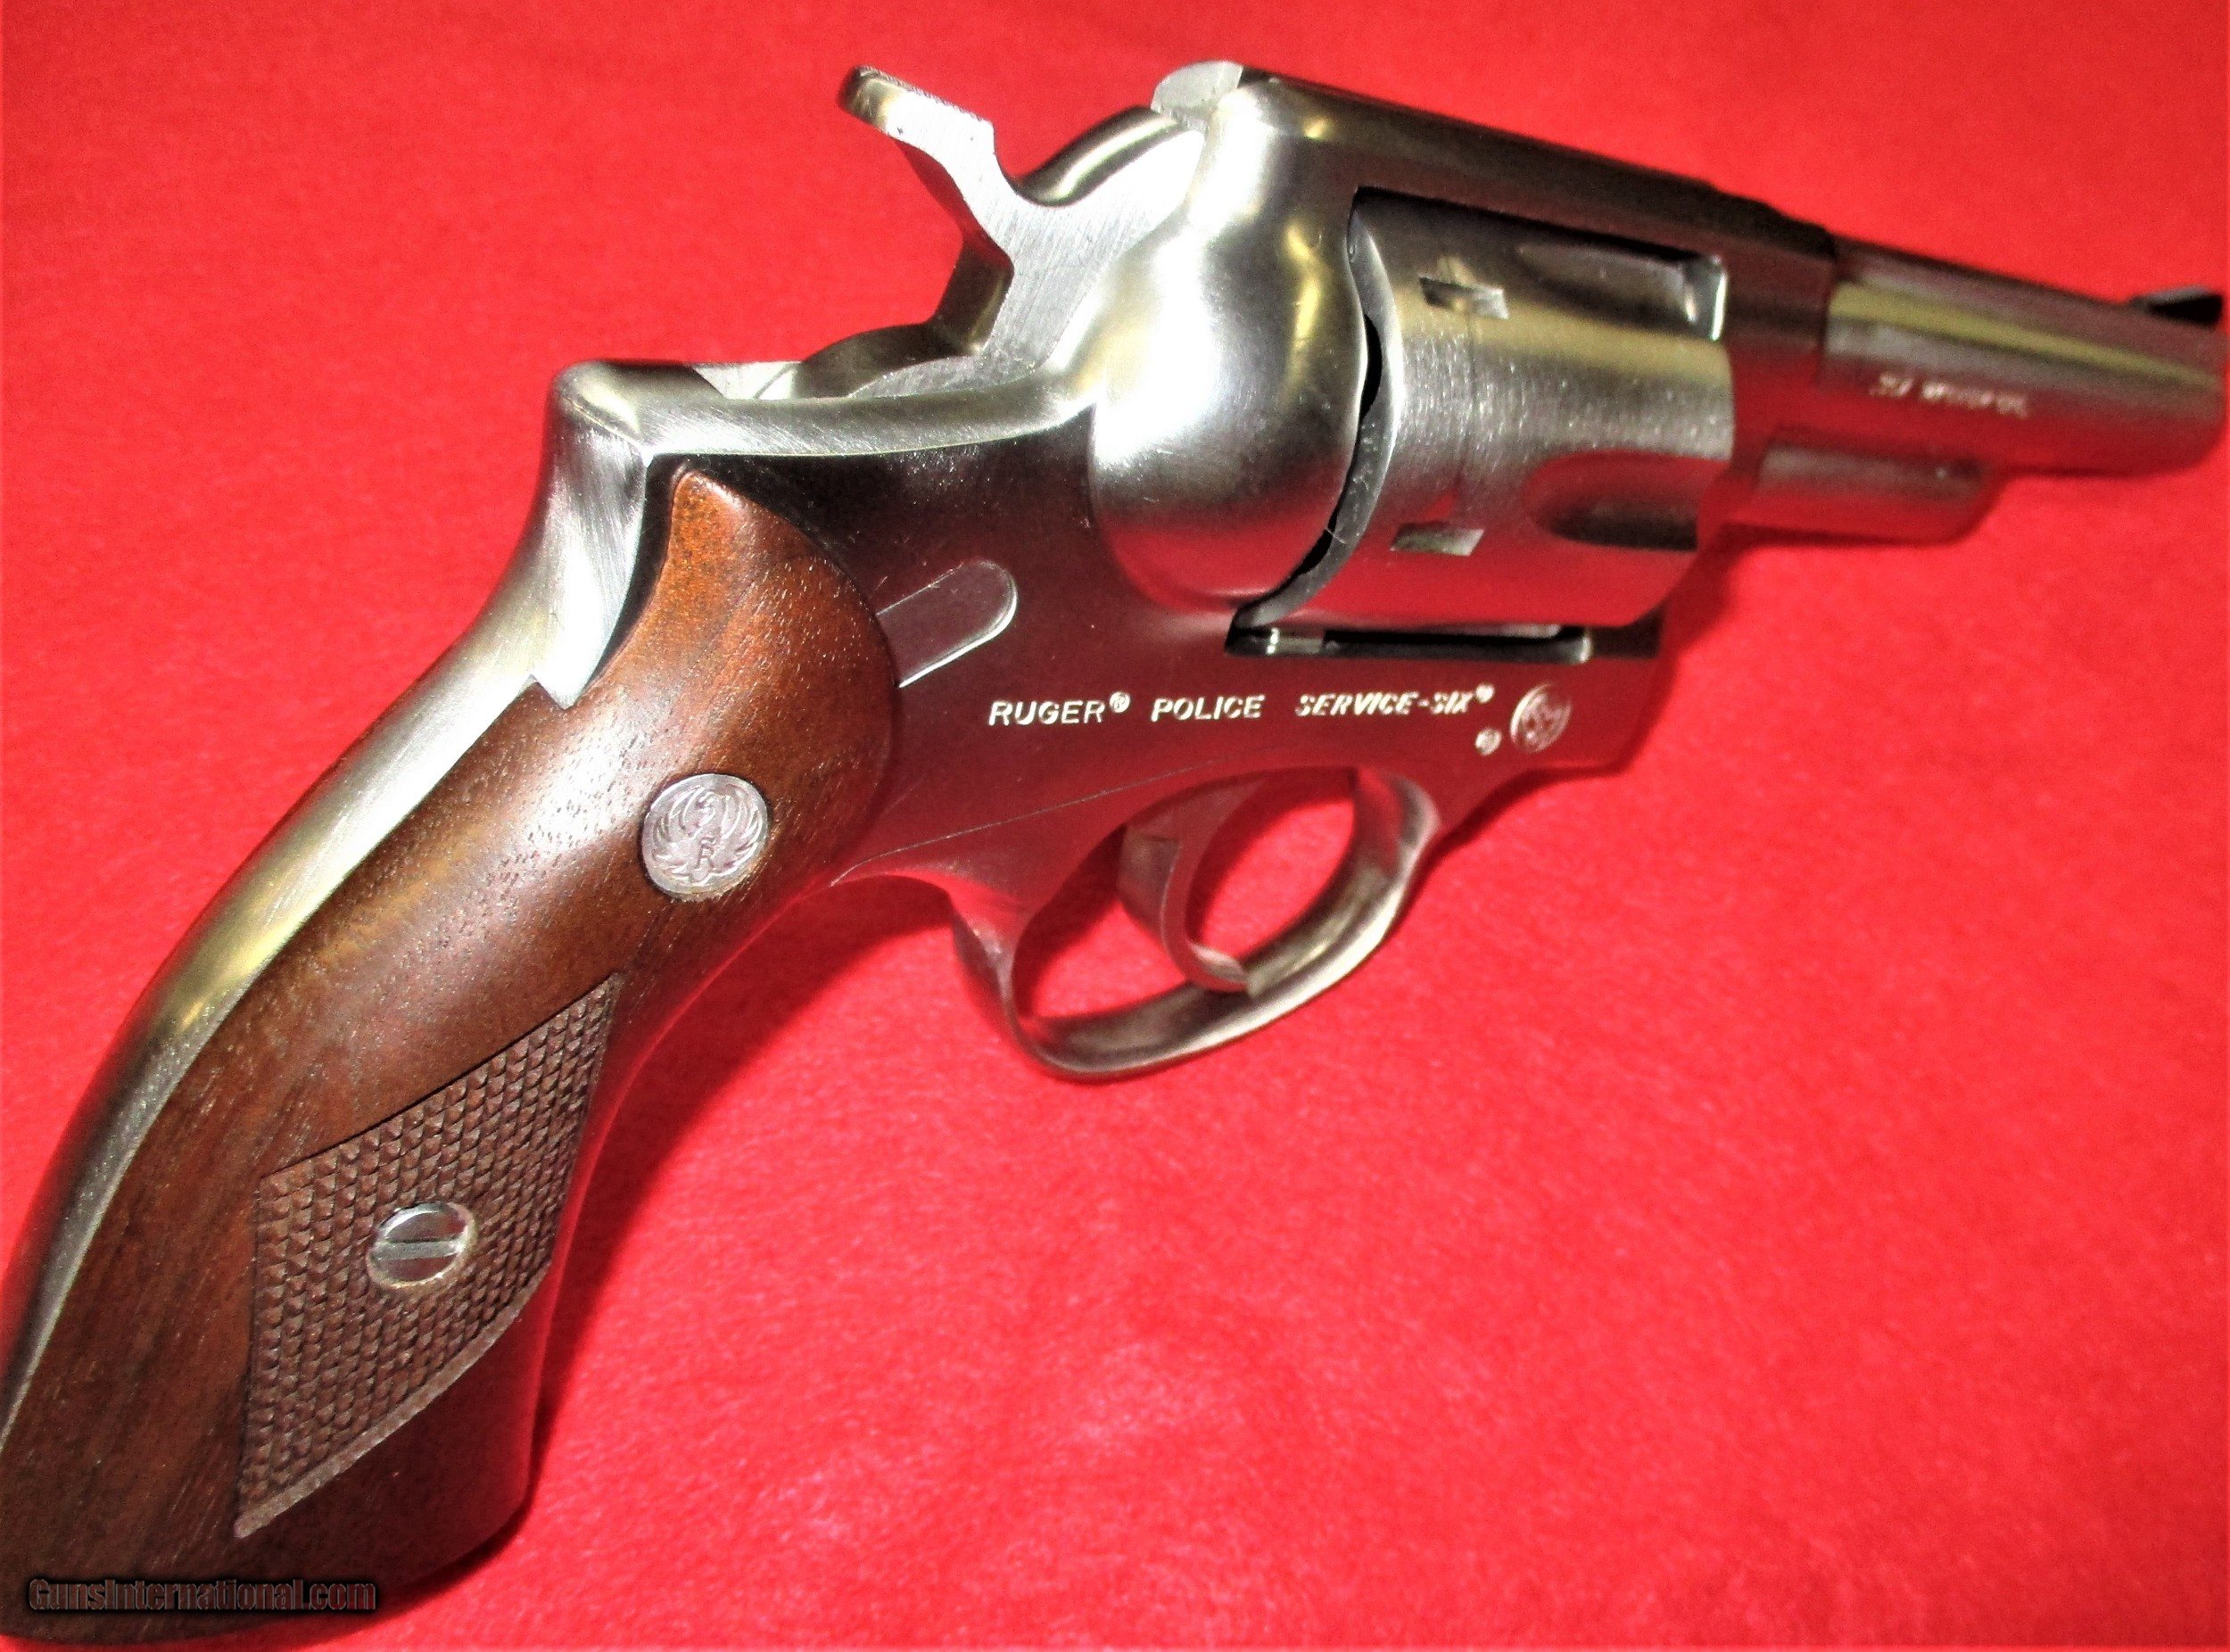 ruger service six vs smith and wesson model 10